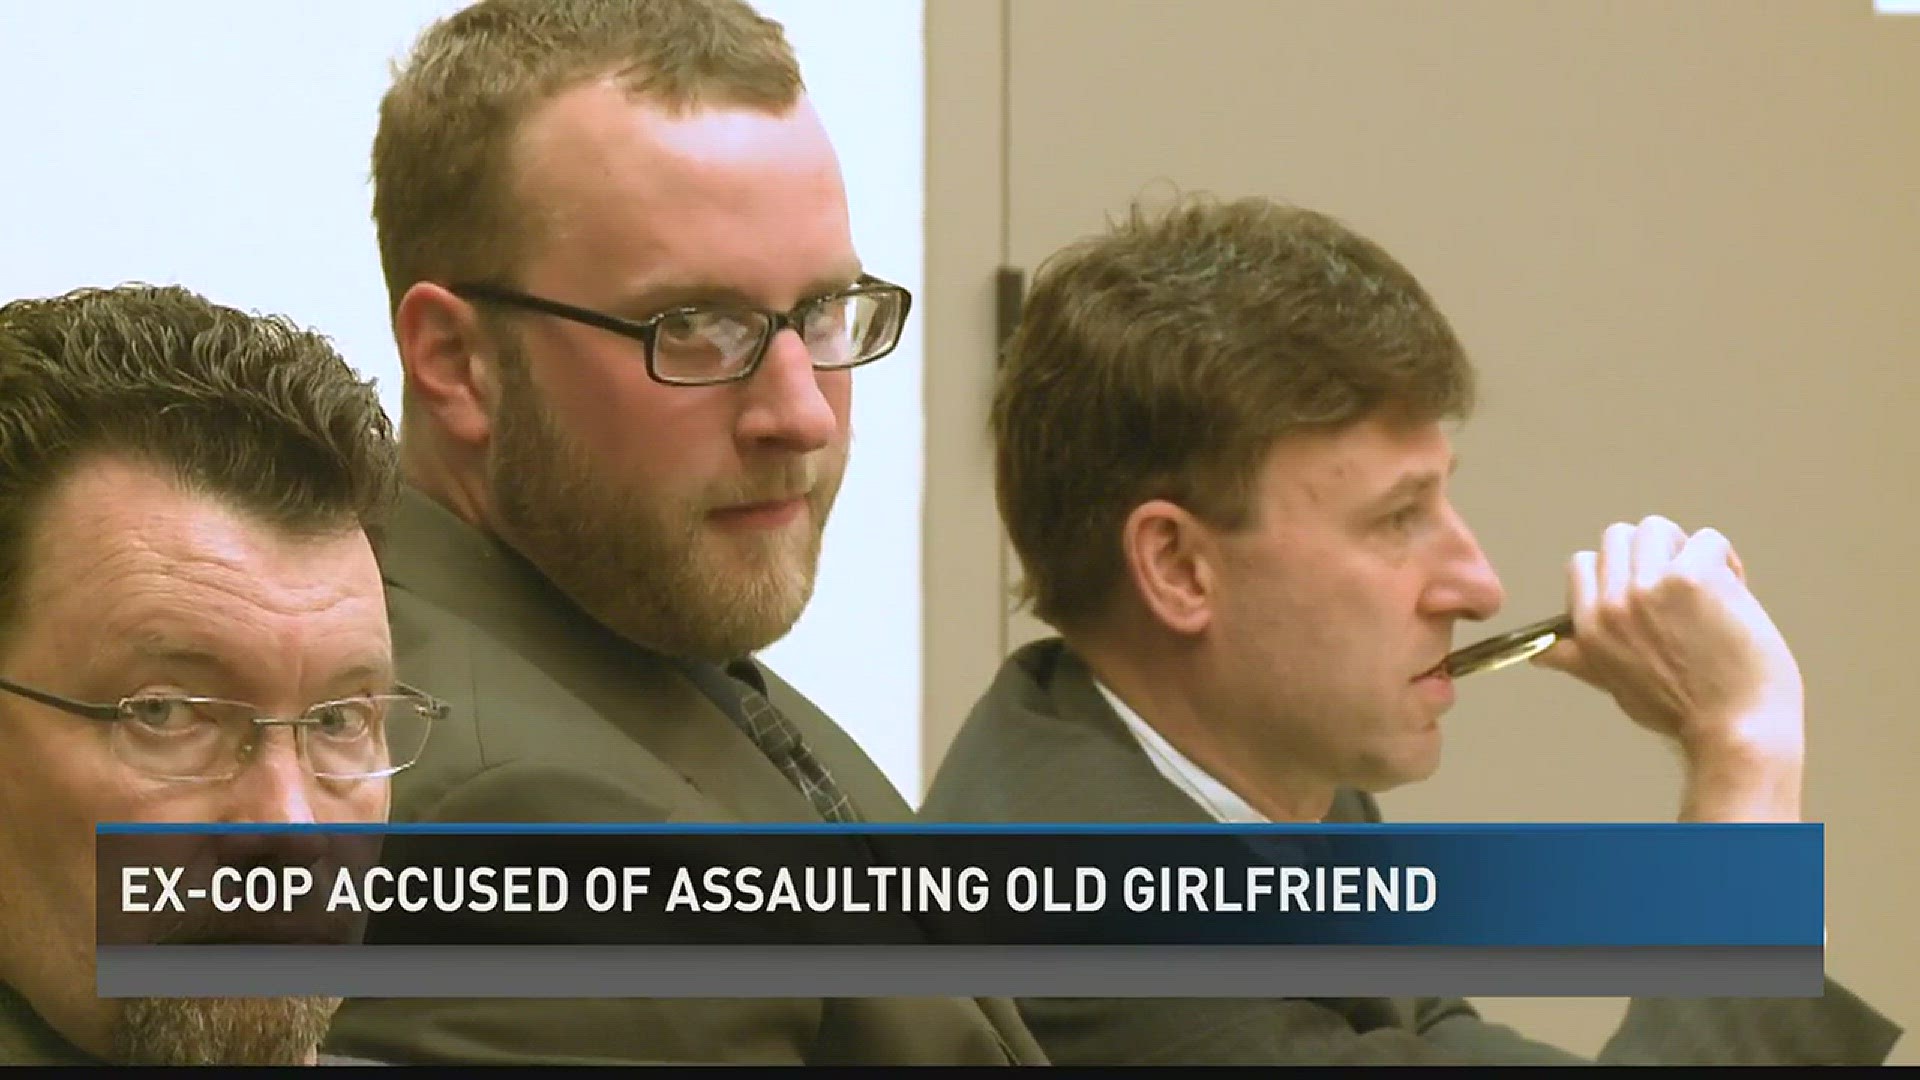 It's up to the jury to determine whether the incident was an attack or consensual sex.